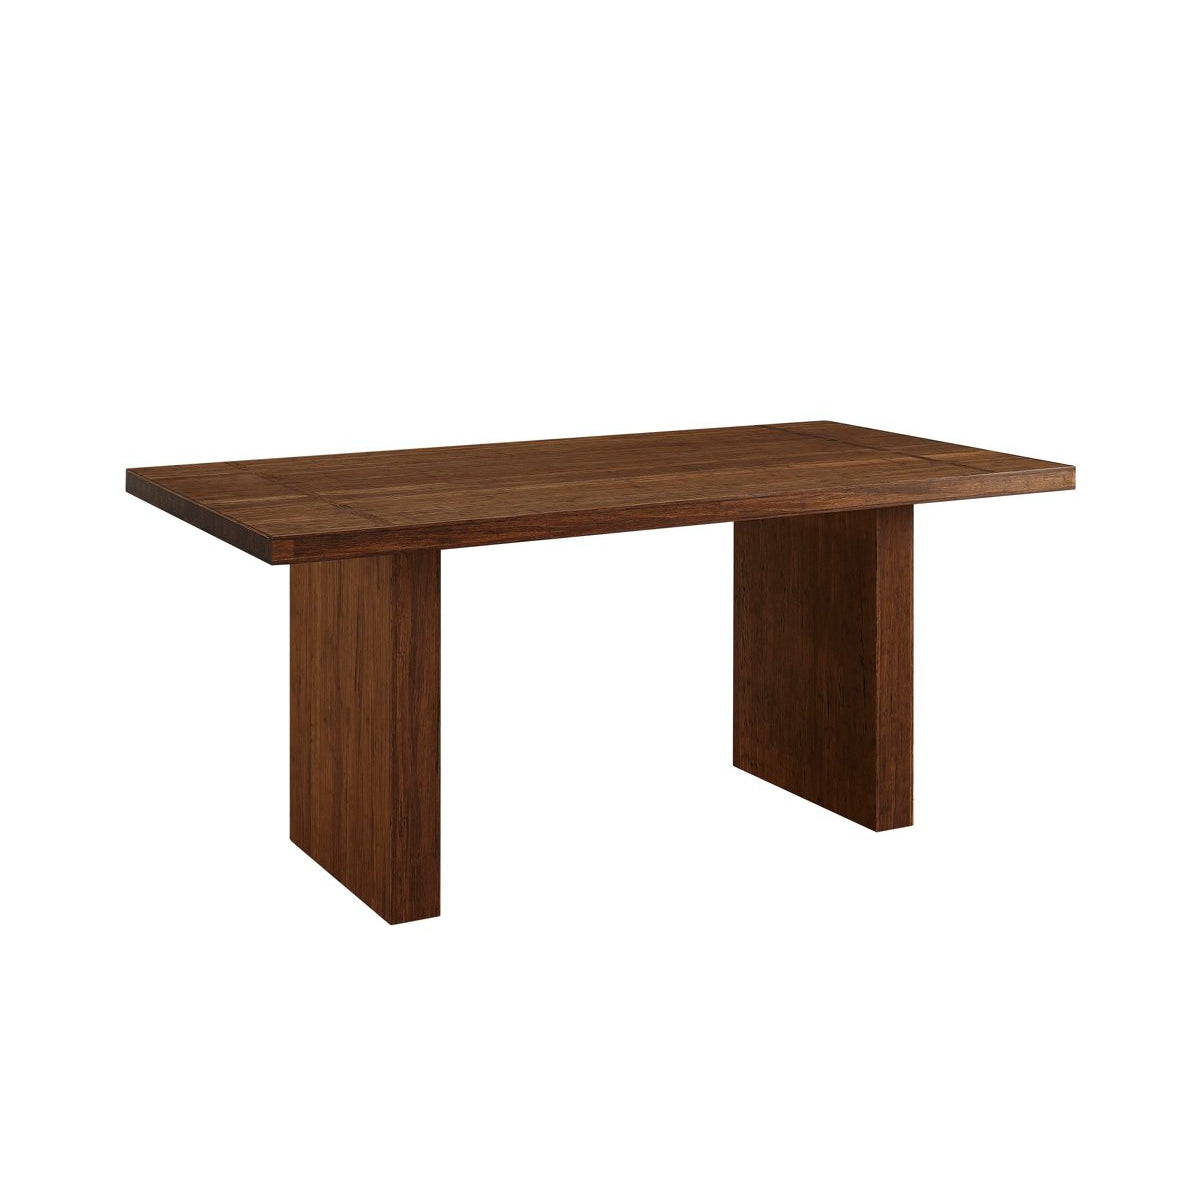 Greenington Sequoia 84" Dining Table, Distressed Exotic - Dining Tables - Bamboo Mod - 1